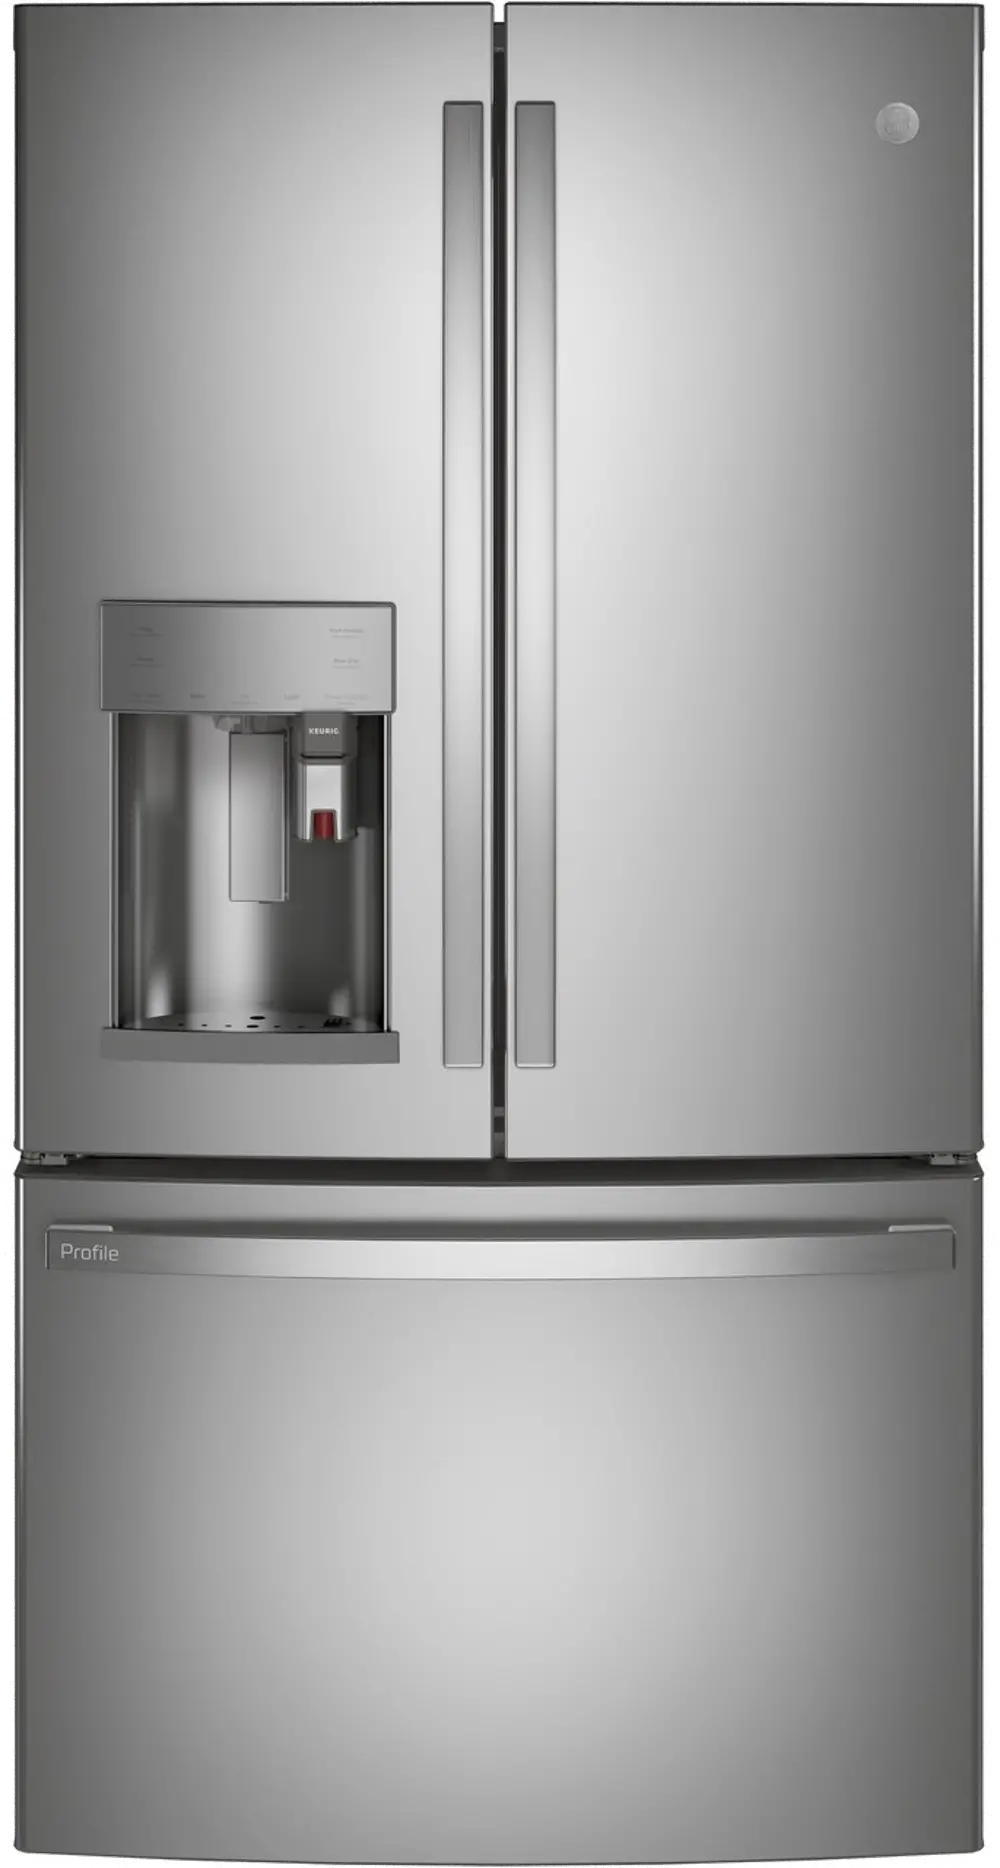 PYE22PYNFS GE Profile 22 cu ft French Door Refrigerator - Counter Depth Stainless Steel-1